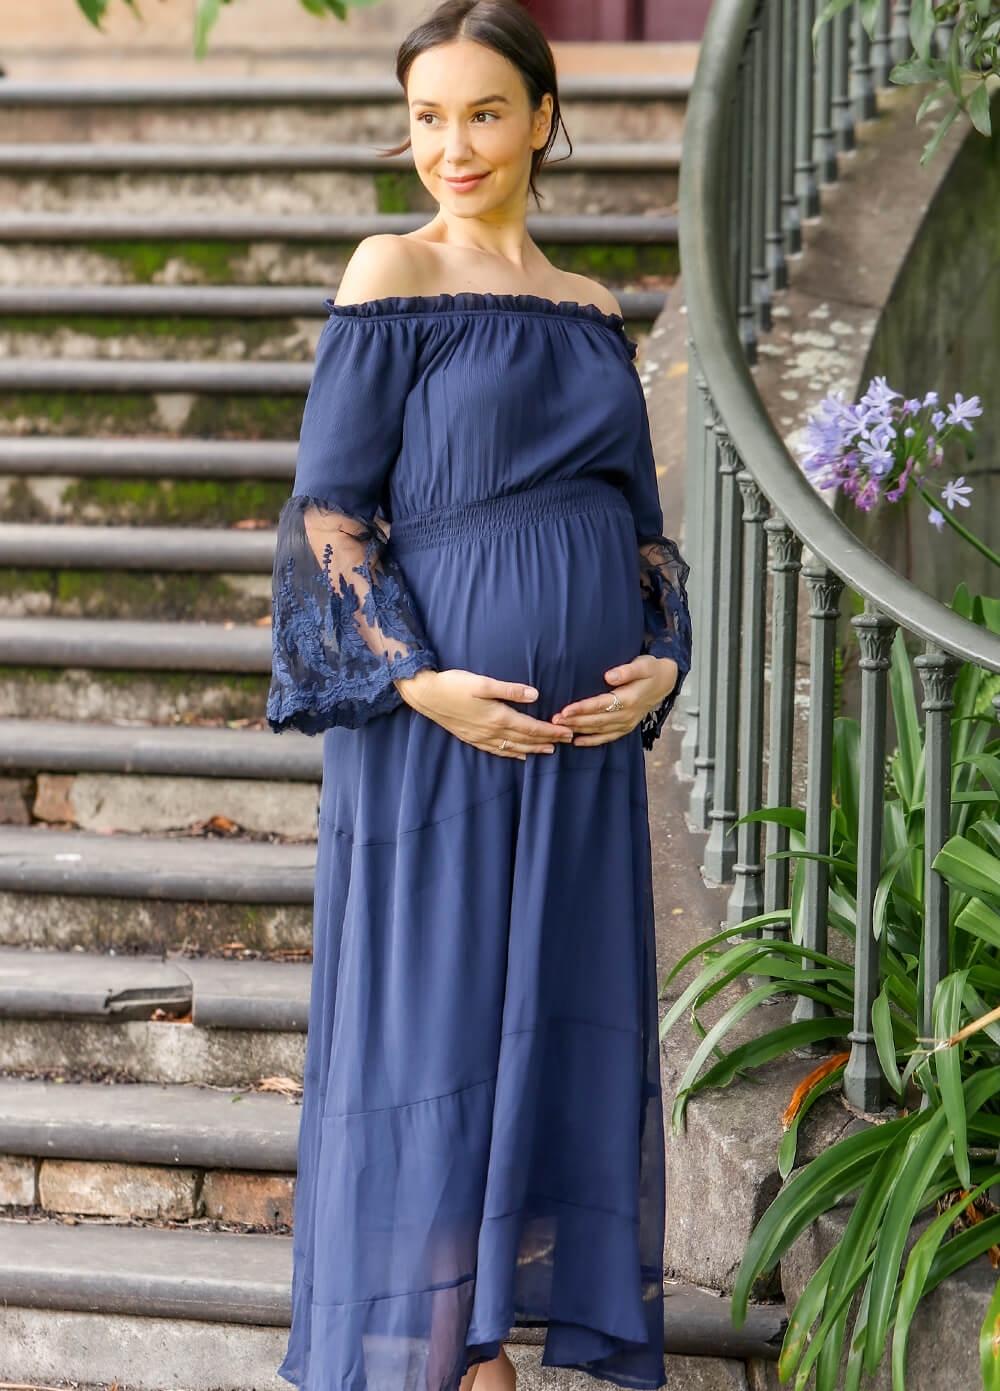 Lait & Co - Ruby-Grace Lace Sleeve Maternity Gown in Navy